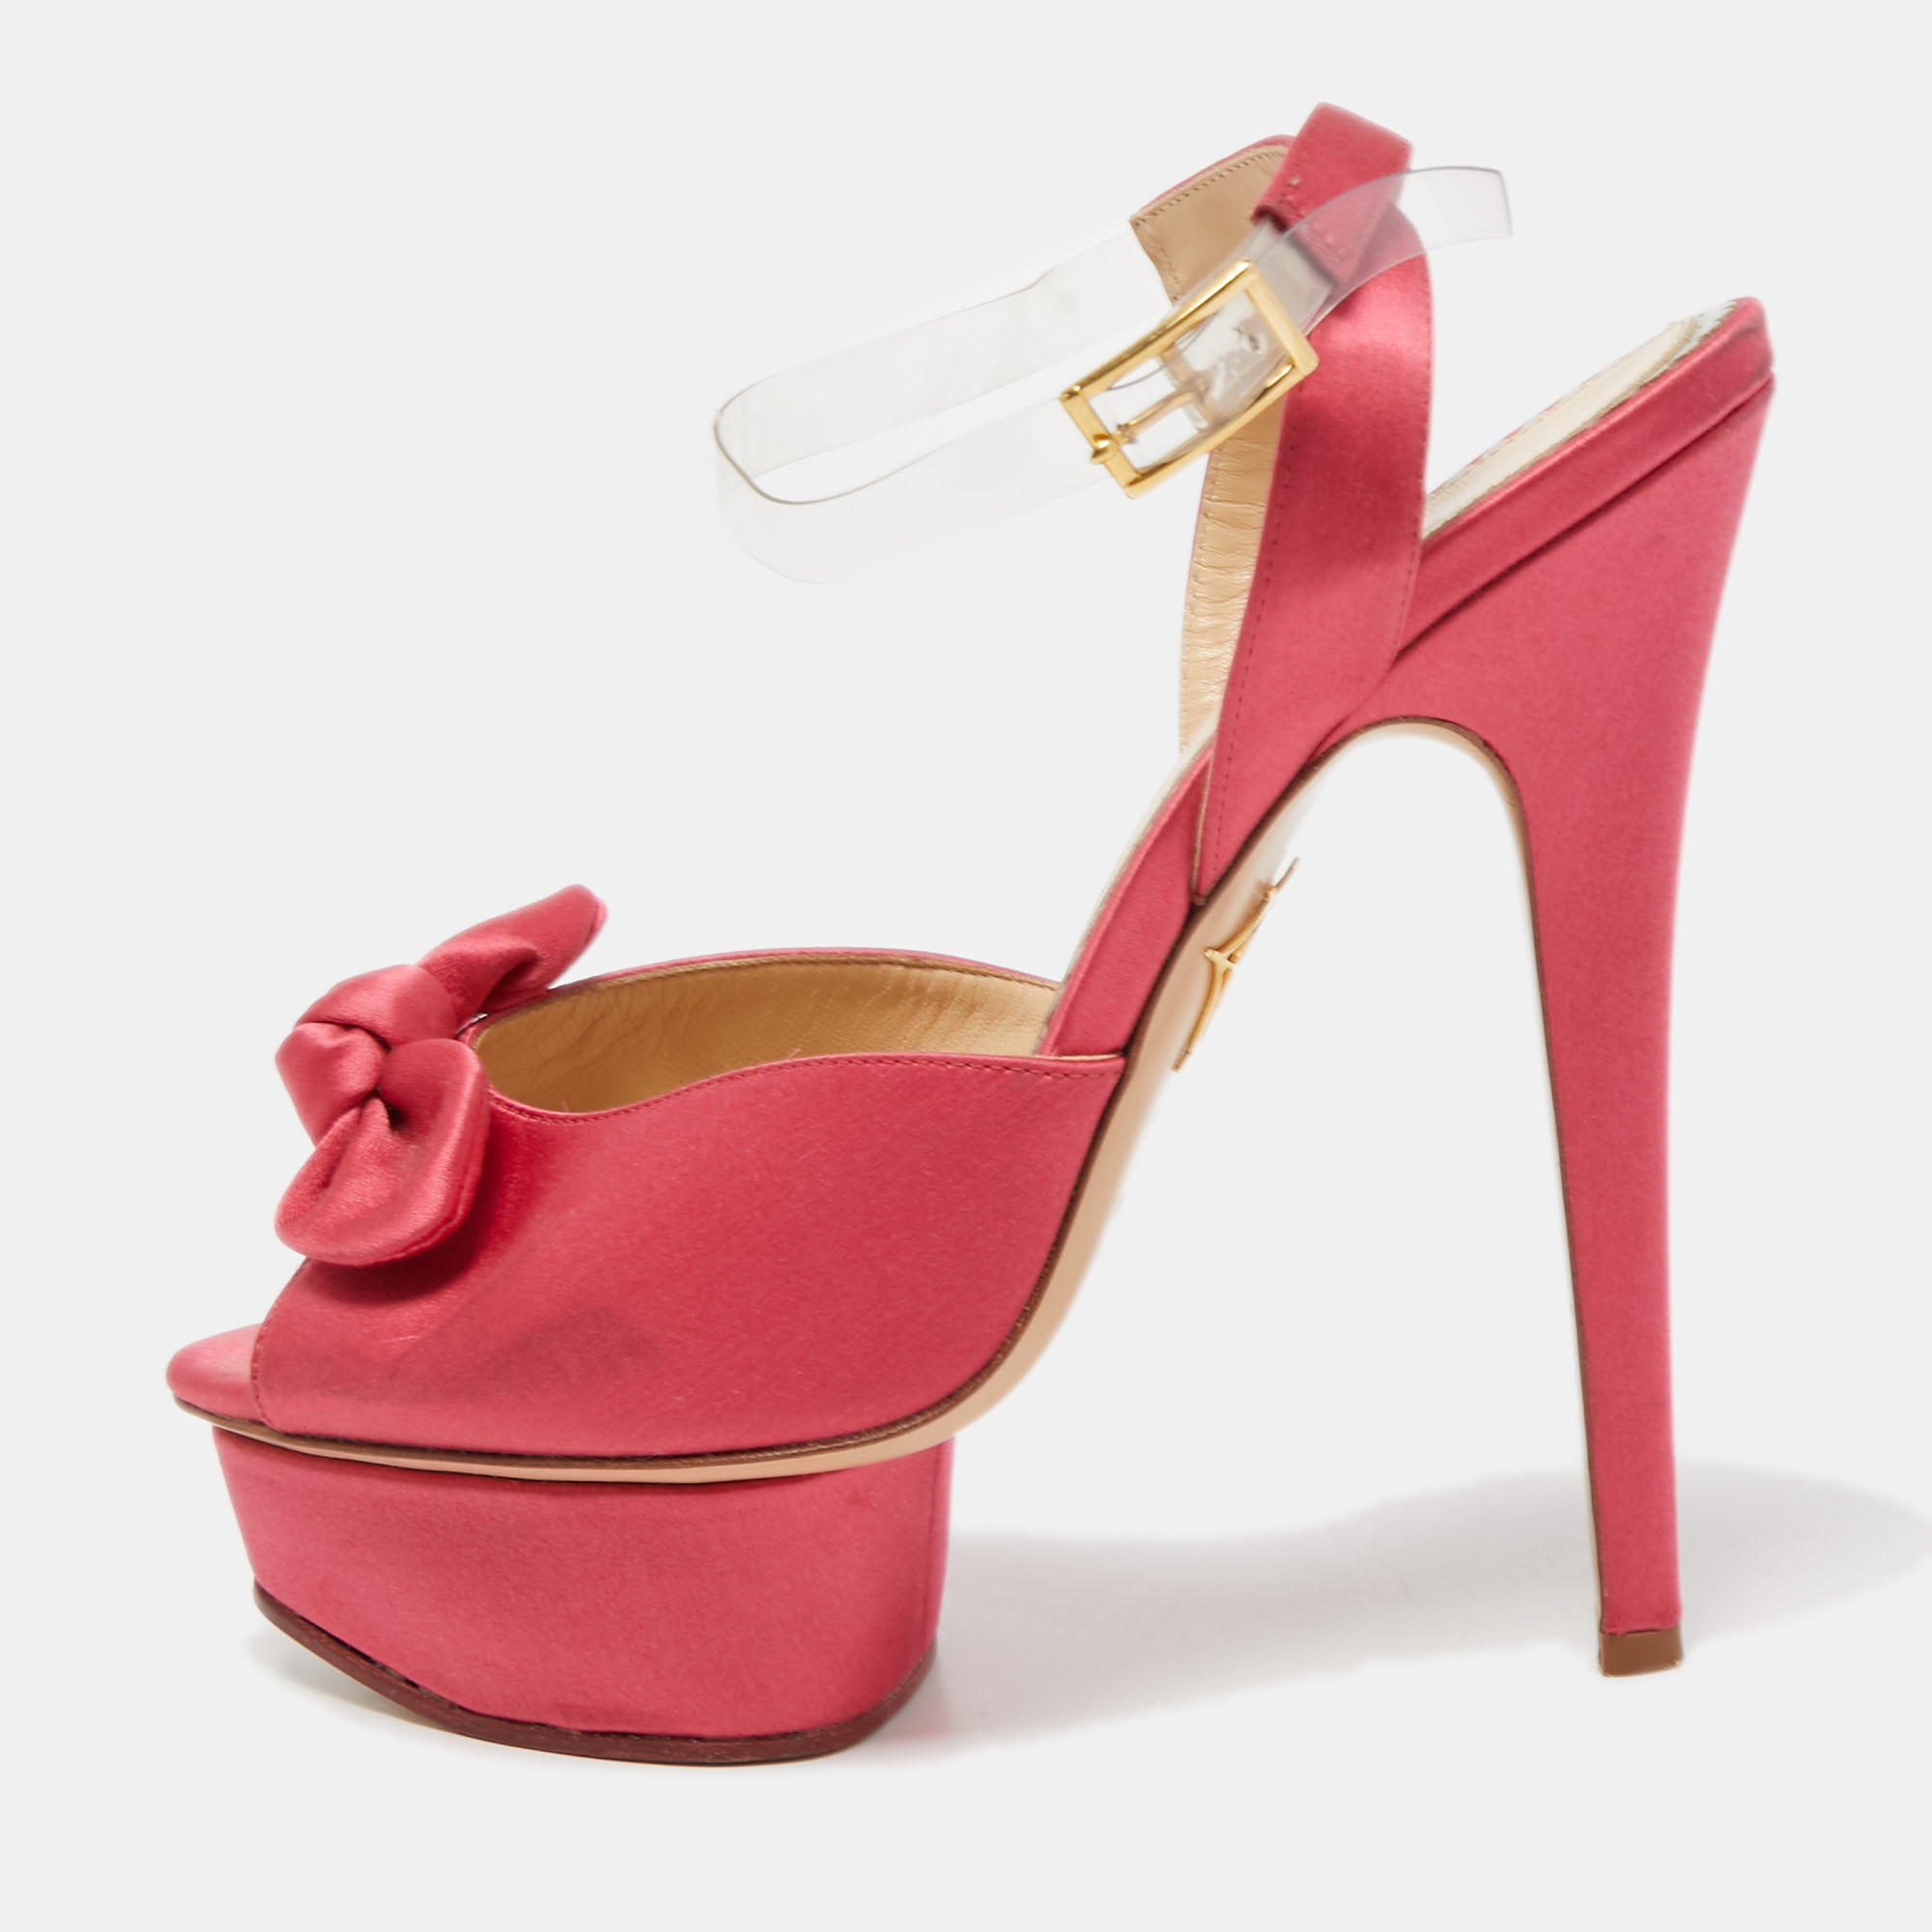 Pre-owned Charlotte Olympia Pink Satin Serena Bow Ankle Strap Platform Sandals Size 38